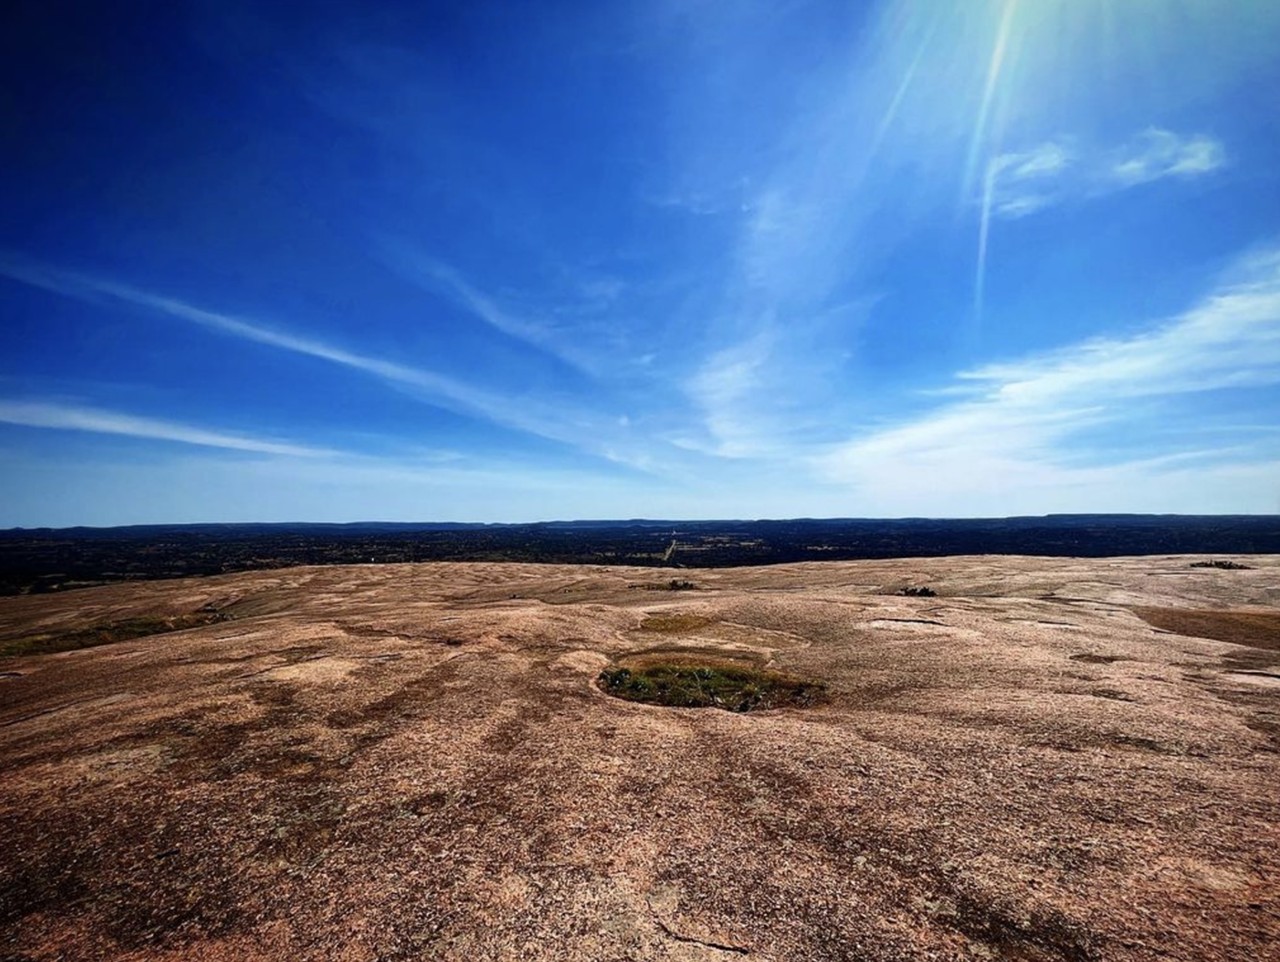 Enchanted Rock State Natural Area
16710 Ranch Road 965, Fredericksburg, (830) 685-3636, tpwd.texas.gov
There's a reason climbing Enchanted Rock is a local rite of passage. Those willing to make the drive and trek up to the top of the rock will be rewarded with beautiful views of the Texas Hill Country in addition to Enchanted Rock's own lovely pink granite. If you plan your visit for the weekend (or on a holiday), just make sure to register for a day pass in advance!
Photo via Instagram / the_gingerhead_man